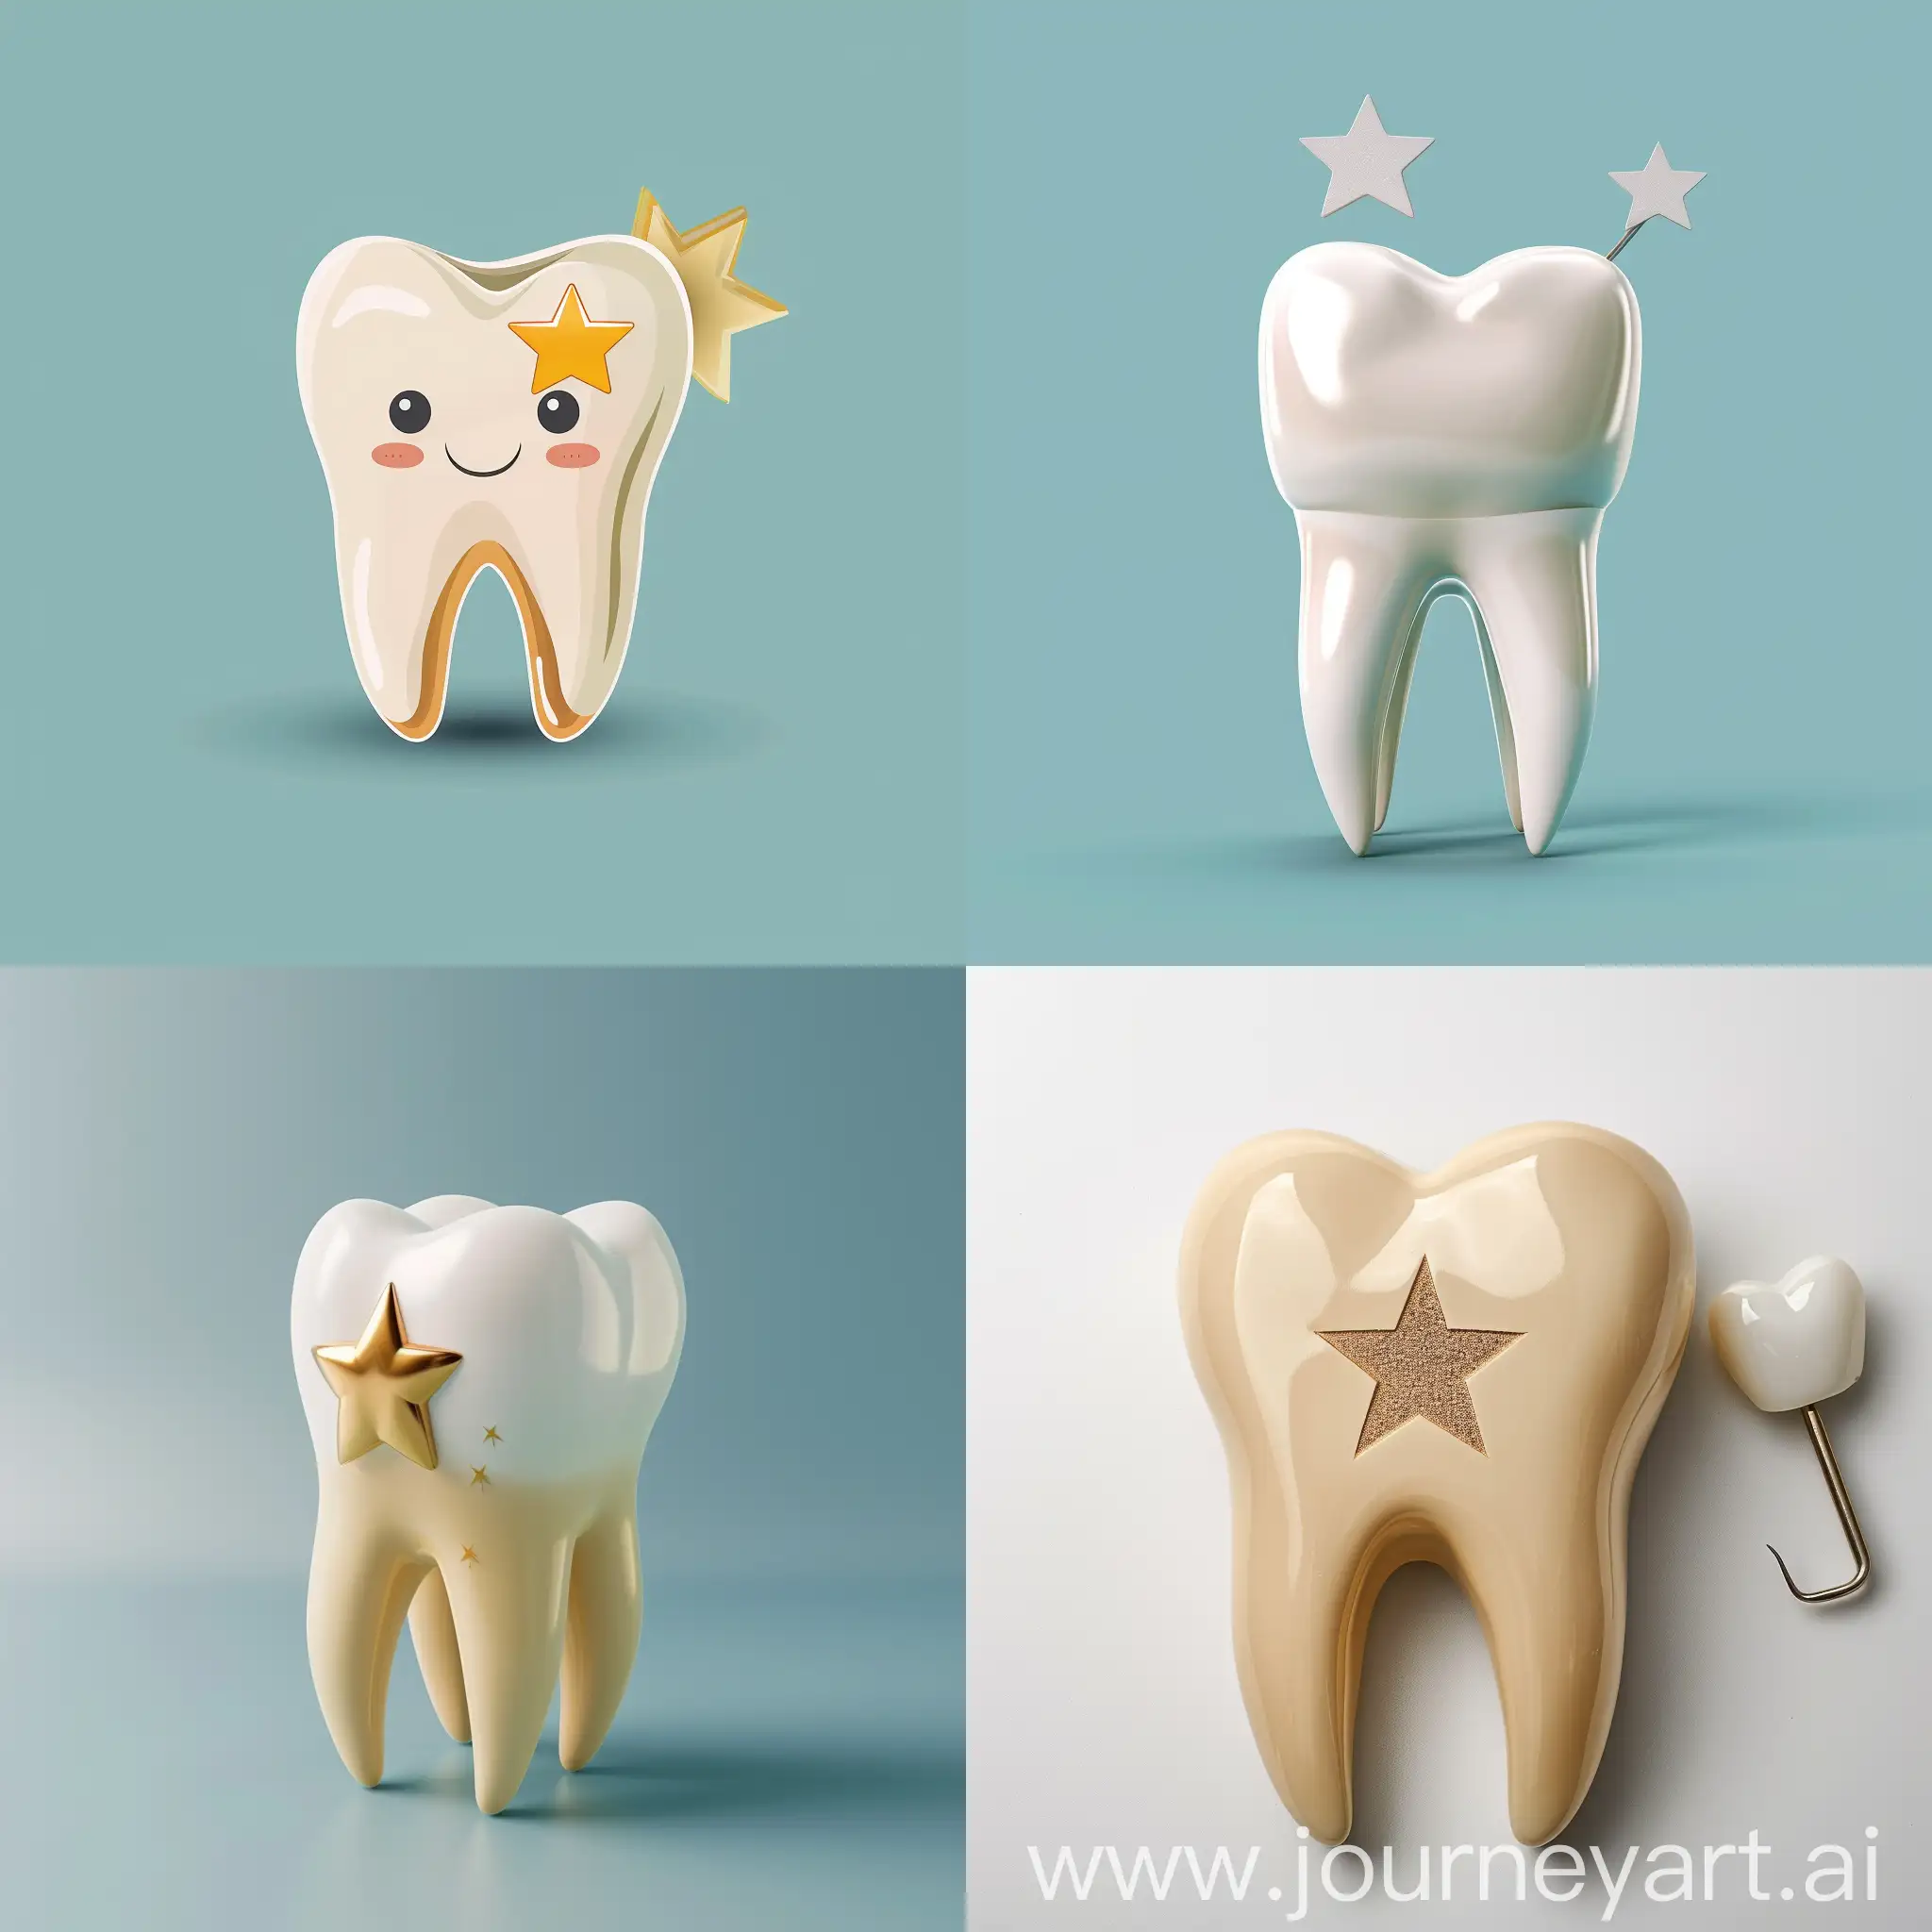 Dental-Health-Concept-Bright-Star-Adorned-Tooth-for-Clinic-Promotion